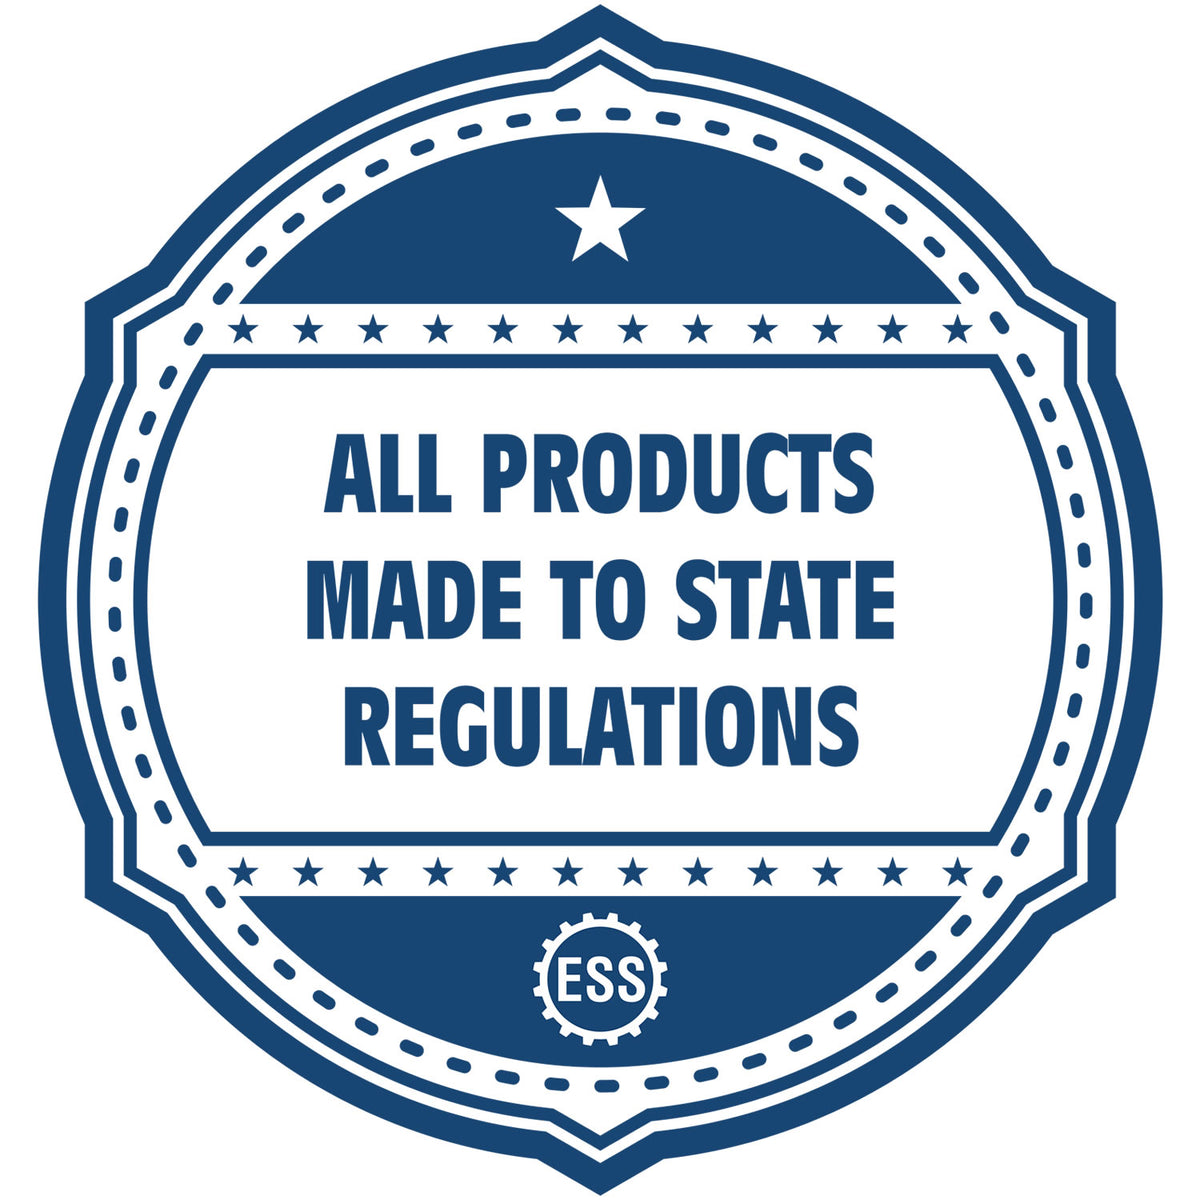 An icon or badge element for the Long Reach Maine PE Seal showing that this product is made in compliance with state regulations.